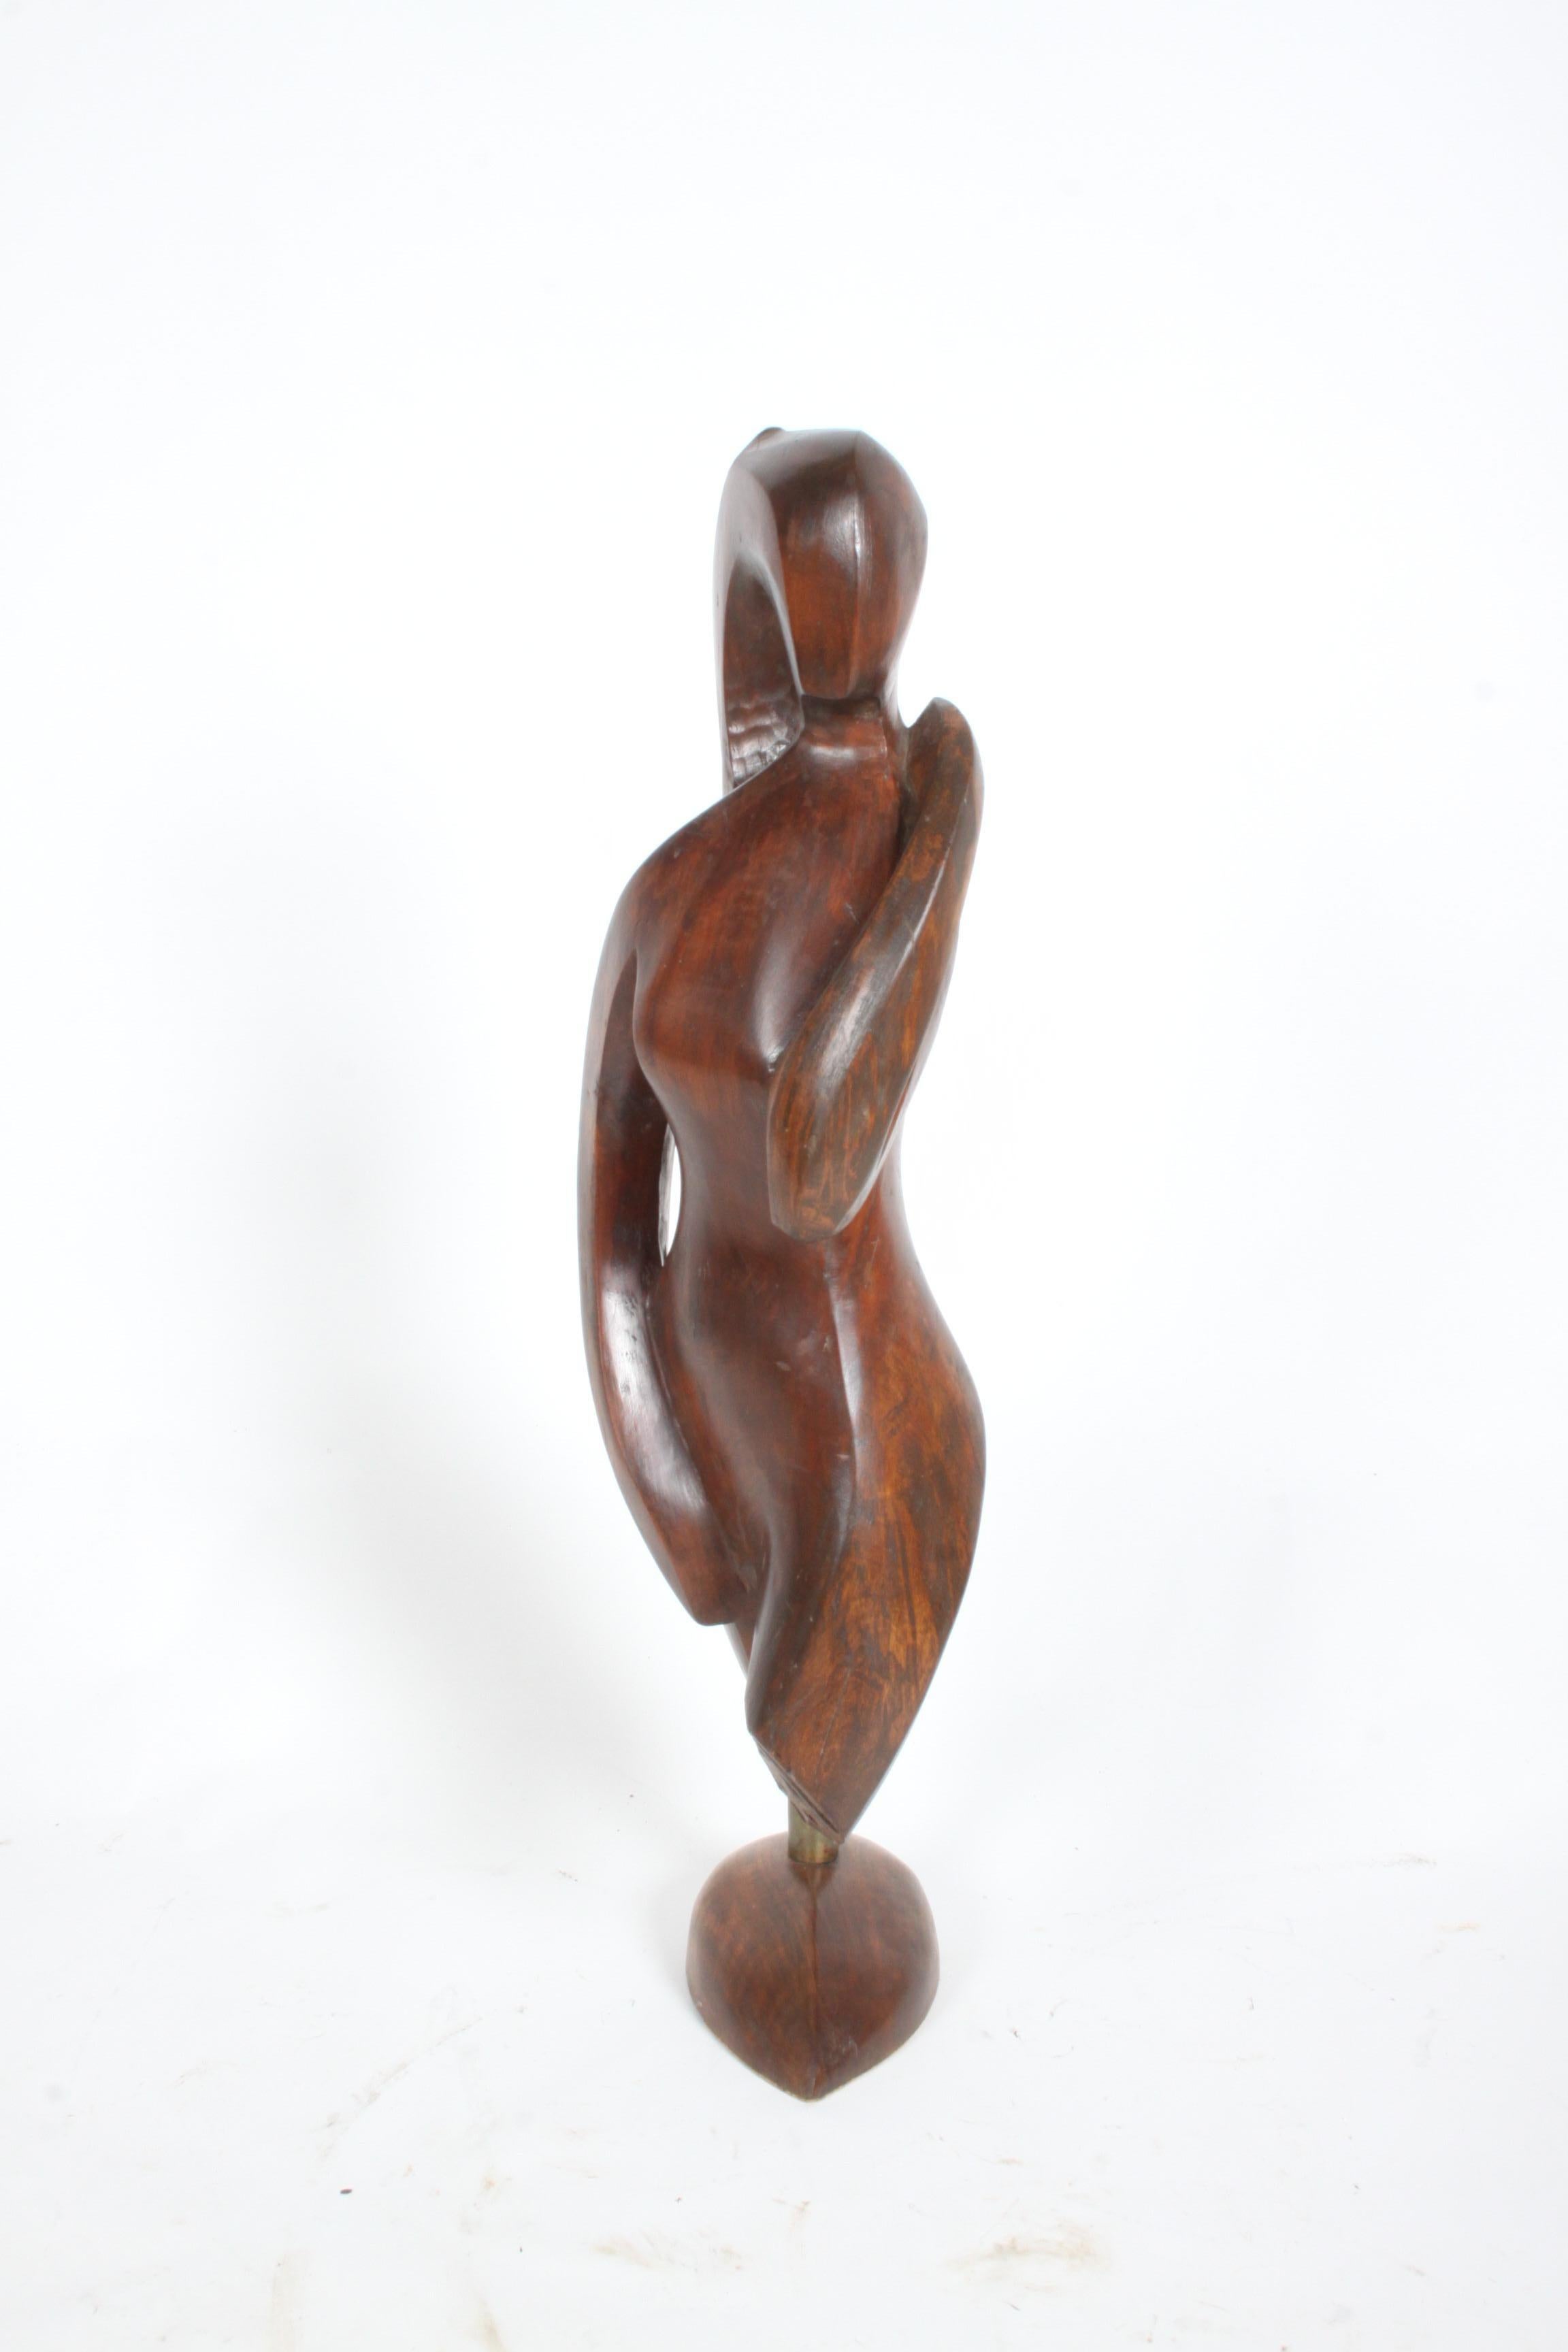 Early large organic mid-century modern hand sculpted wood nude female sculpture by artist / sculptor William Conrad Severson, (1924-1999). A beautiful early piece of work, signed Wm. C. Severson and dated 1956. Abstract female form carved out of